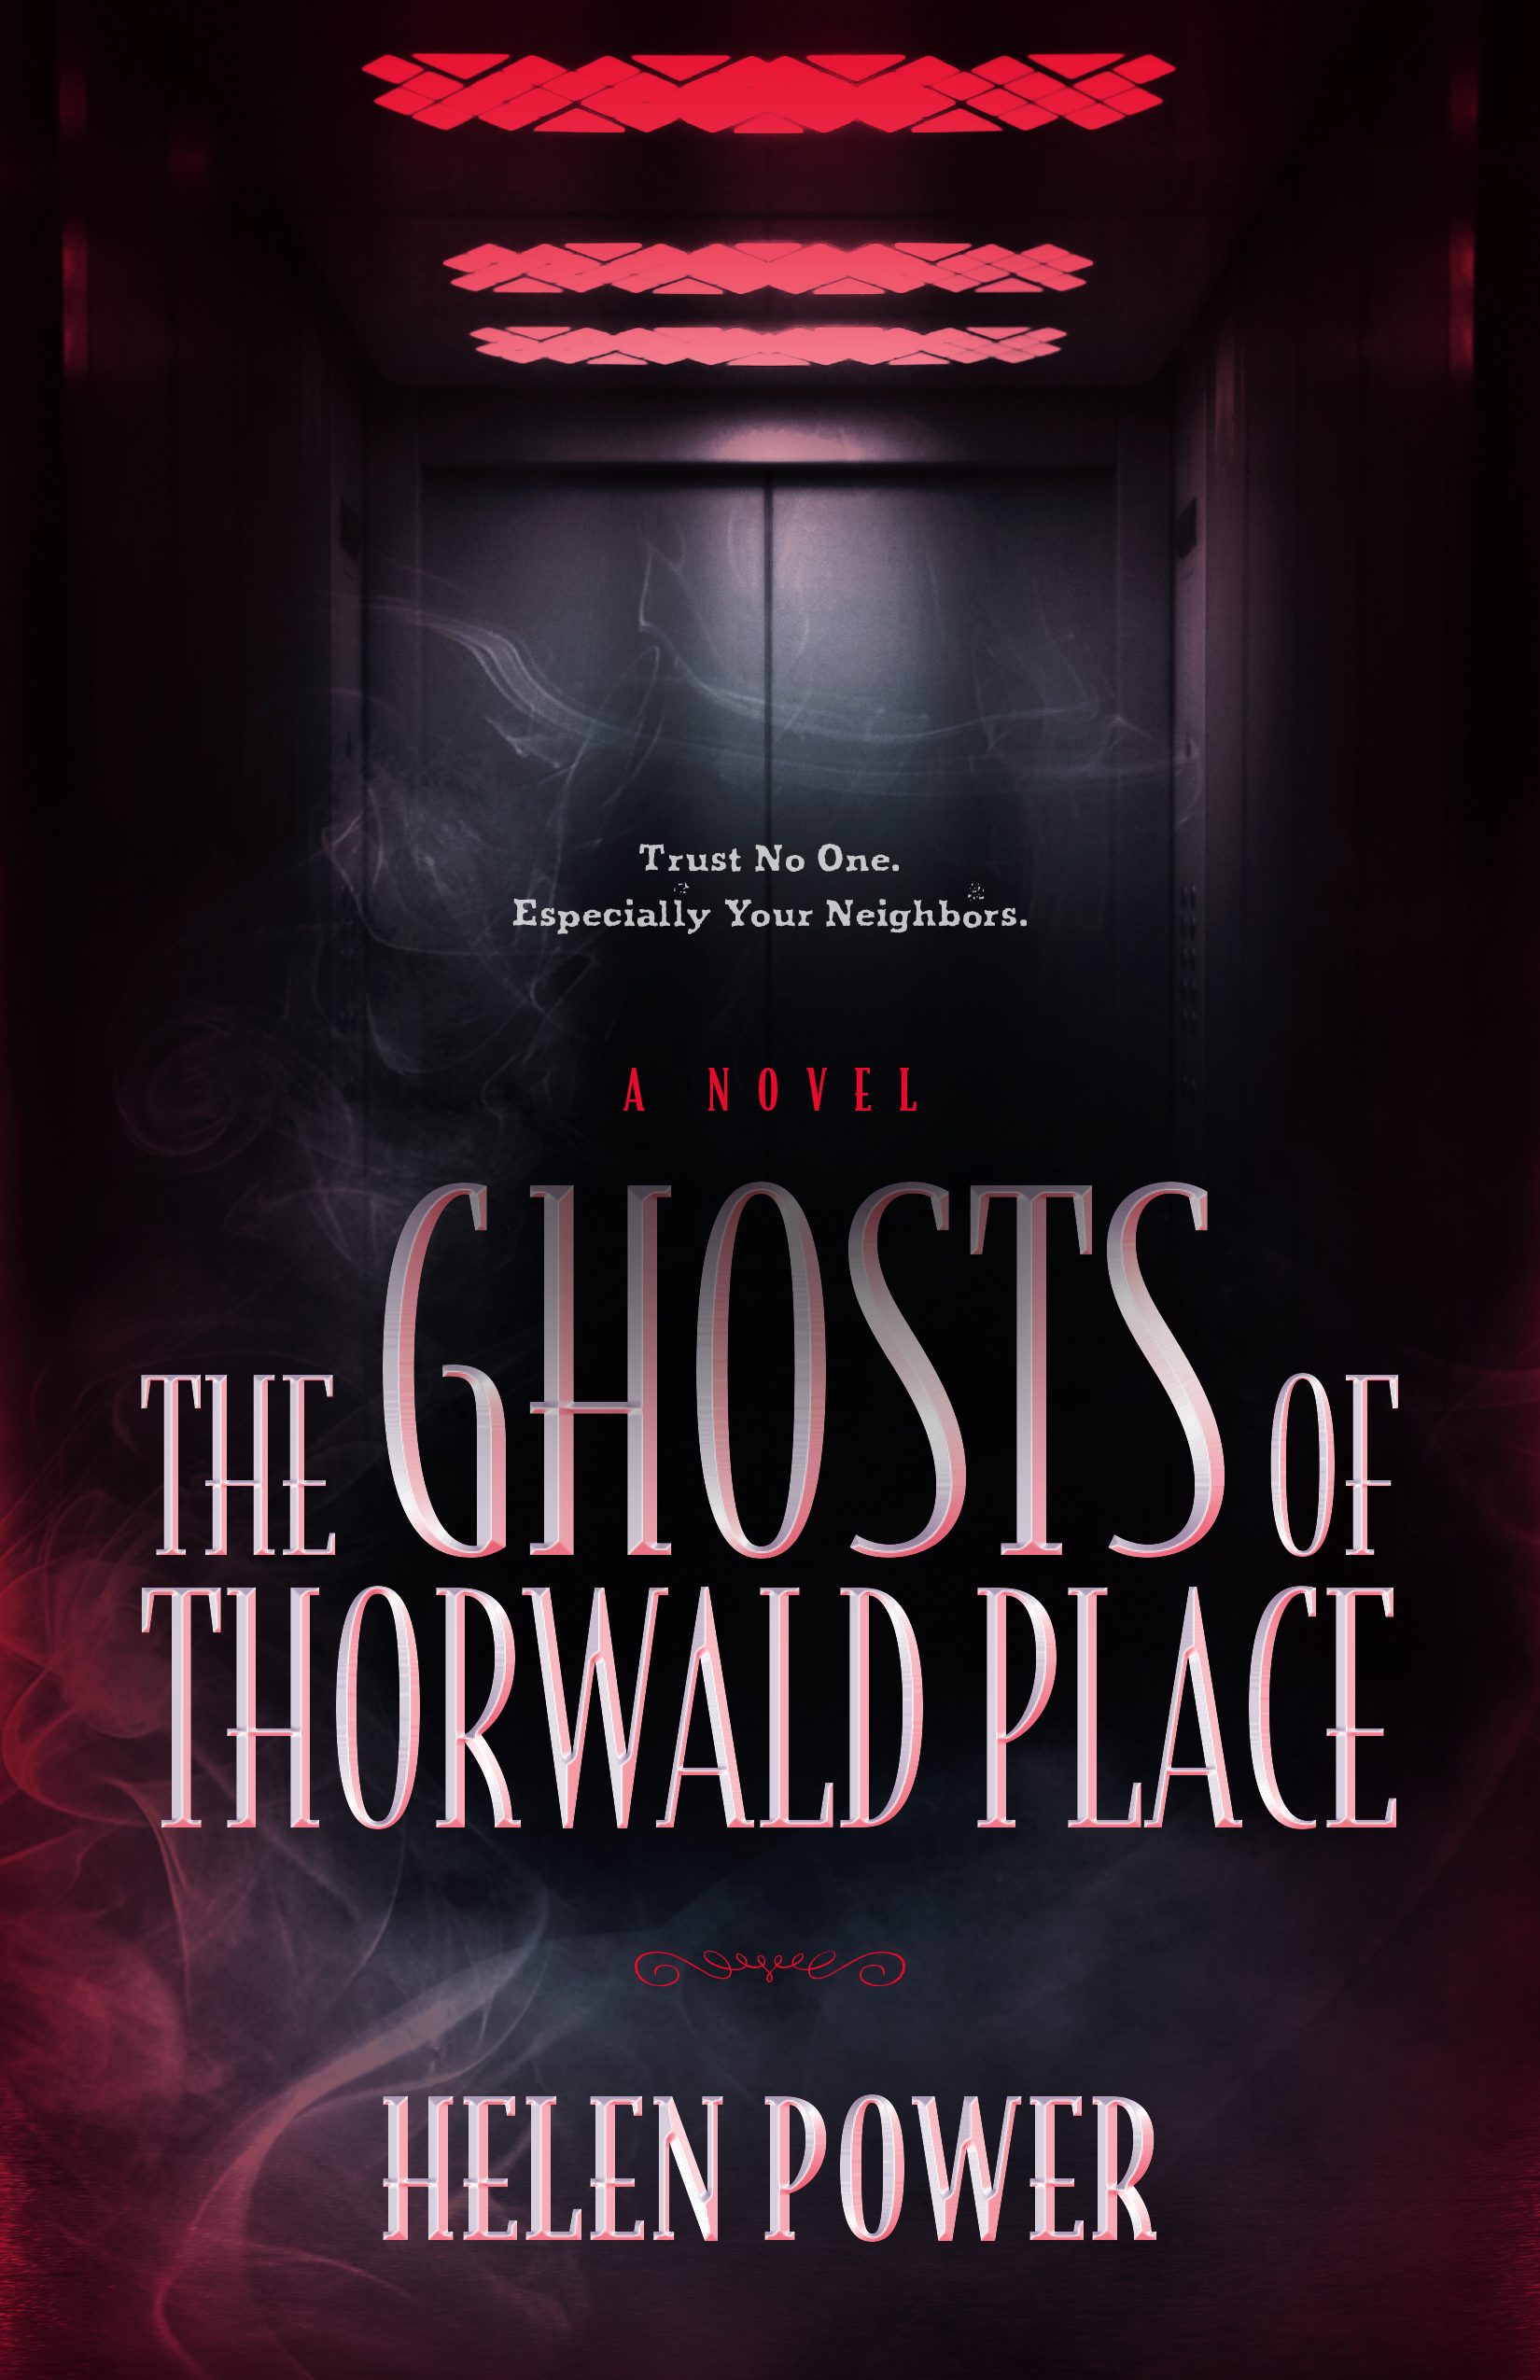 The Ghosts of Thorwald Place by Helen Power